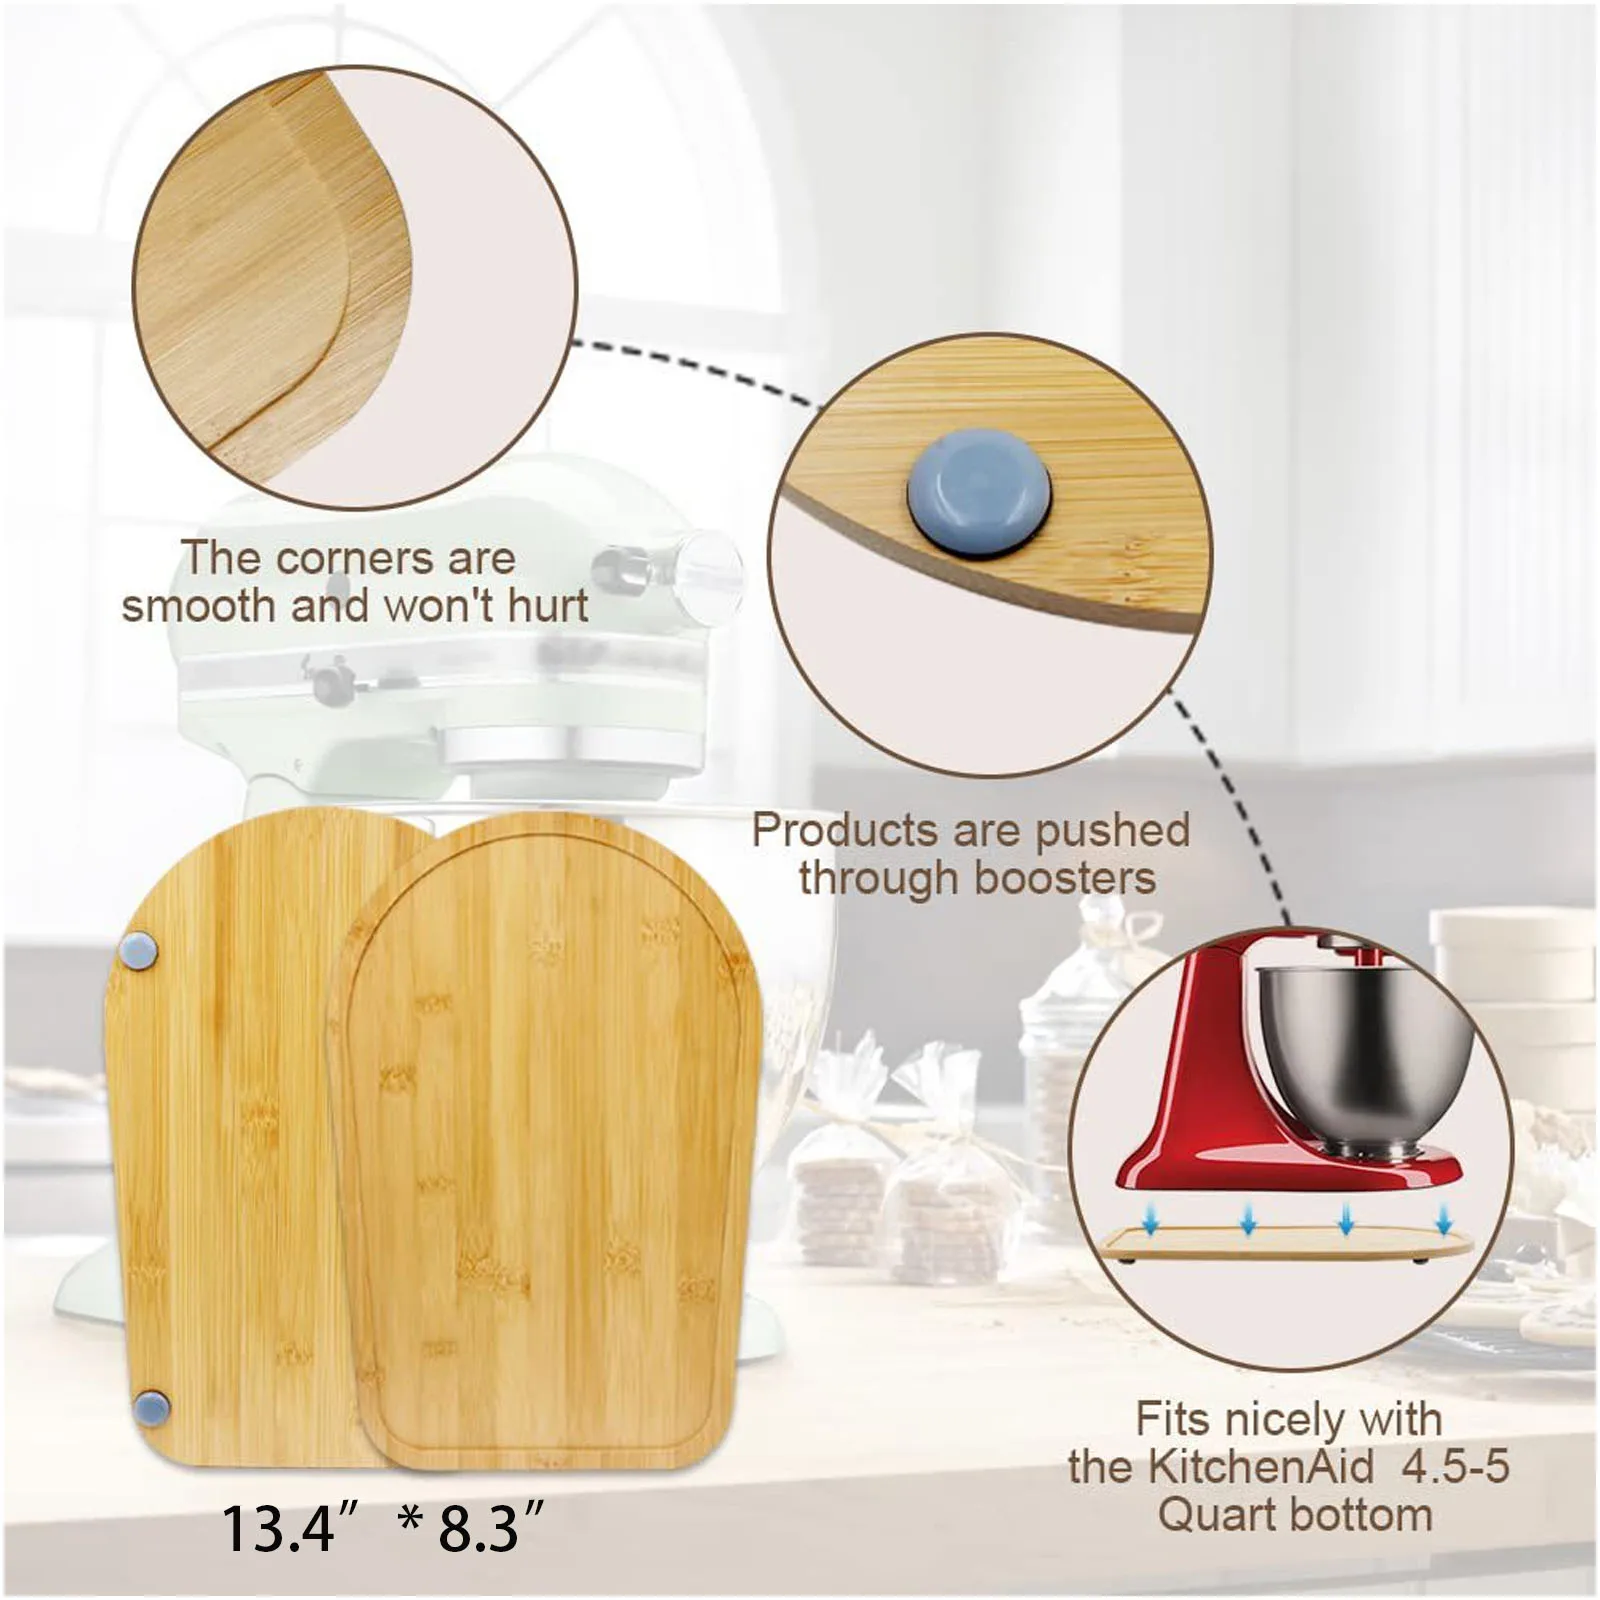 https://ae01.alicdn.com/kf/Sb98499a6008740b5b104a5907aaf670f4/33-5x21x1CM-Bamboo-Mixer-Slider-Compatible-with-Kitchen-aid-Bowl-for-Kitchen-Aid-4-5-5Qt.jpg